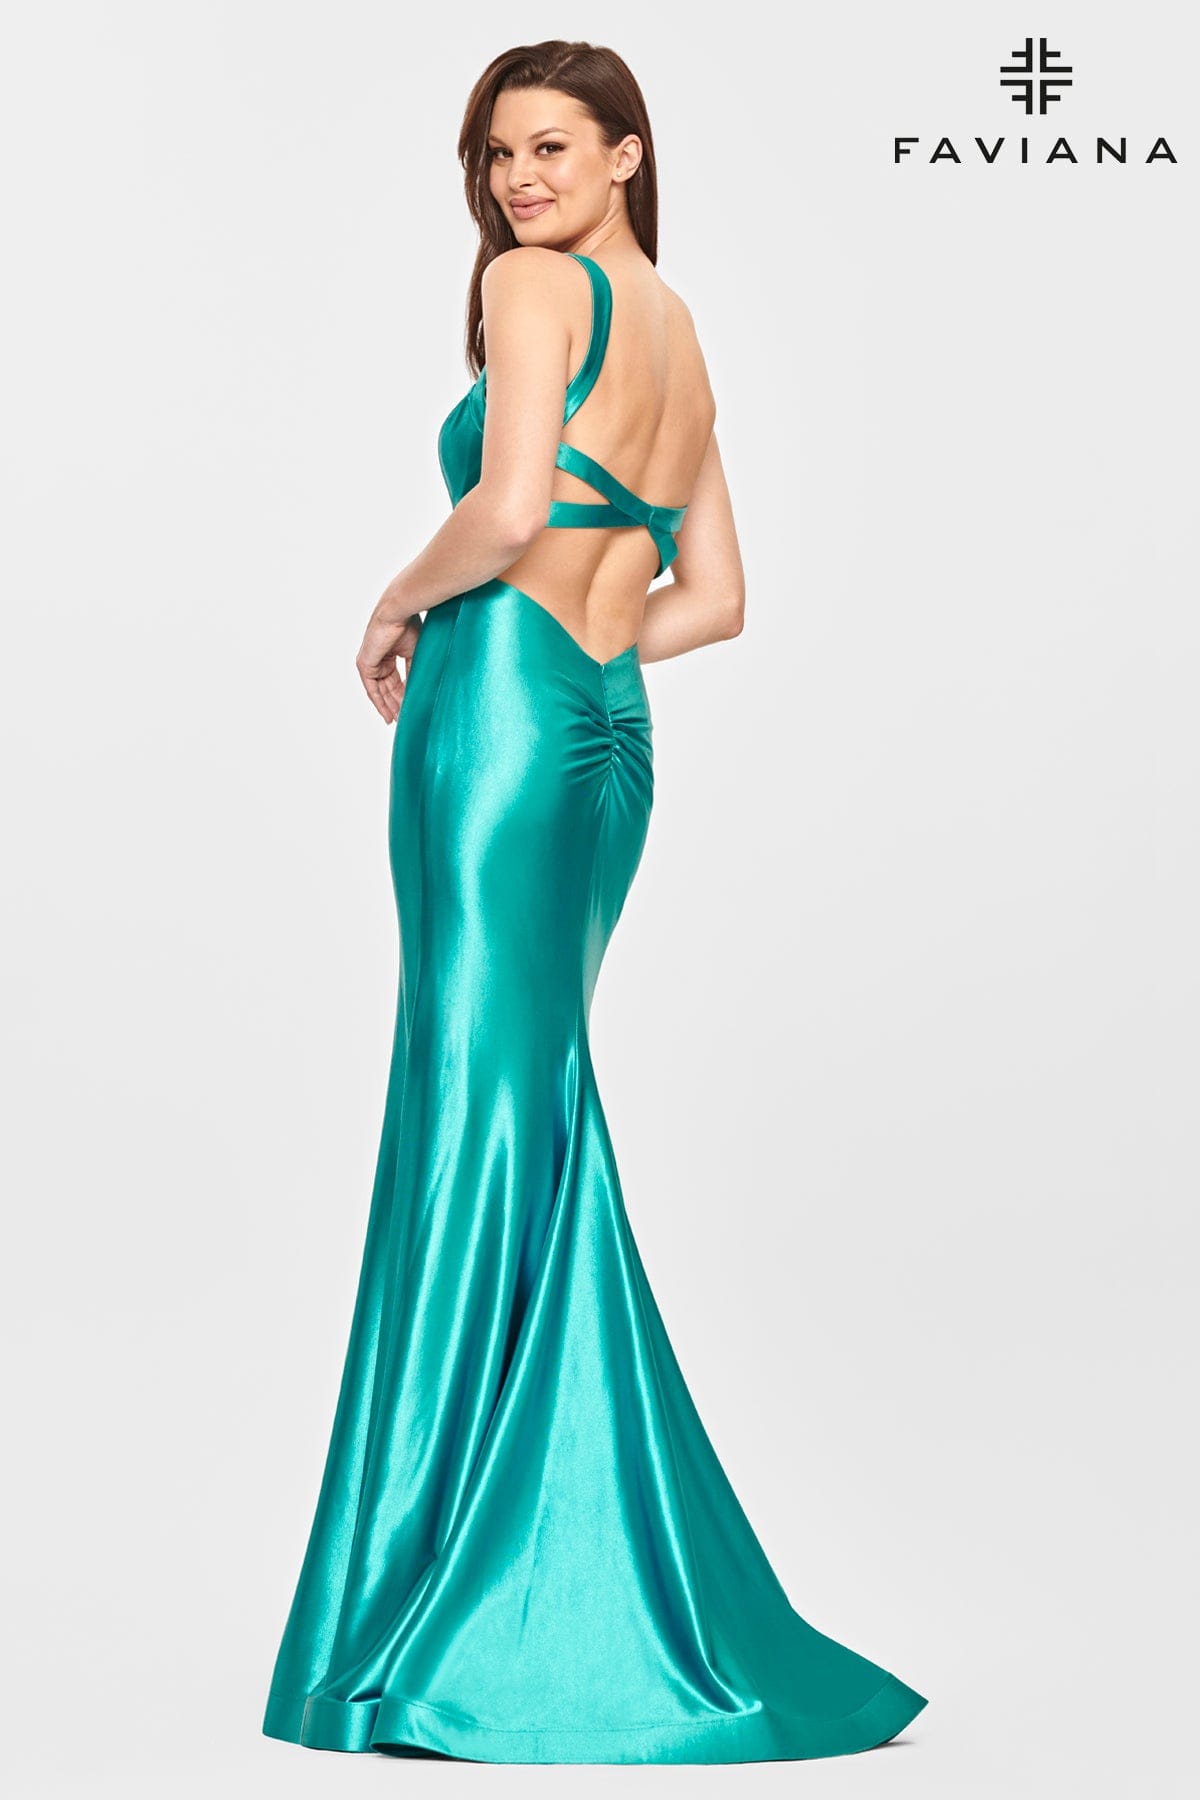 Peacock Satin Scoop Neck Dress With Strappy Open Back Detailing And Fit And Flare Skirt